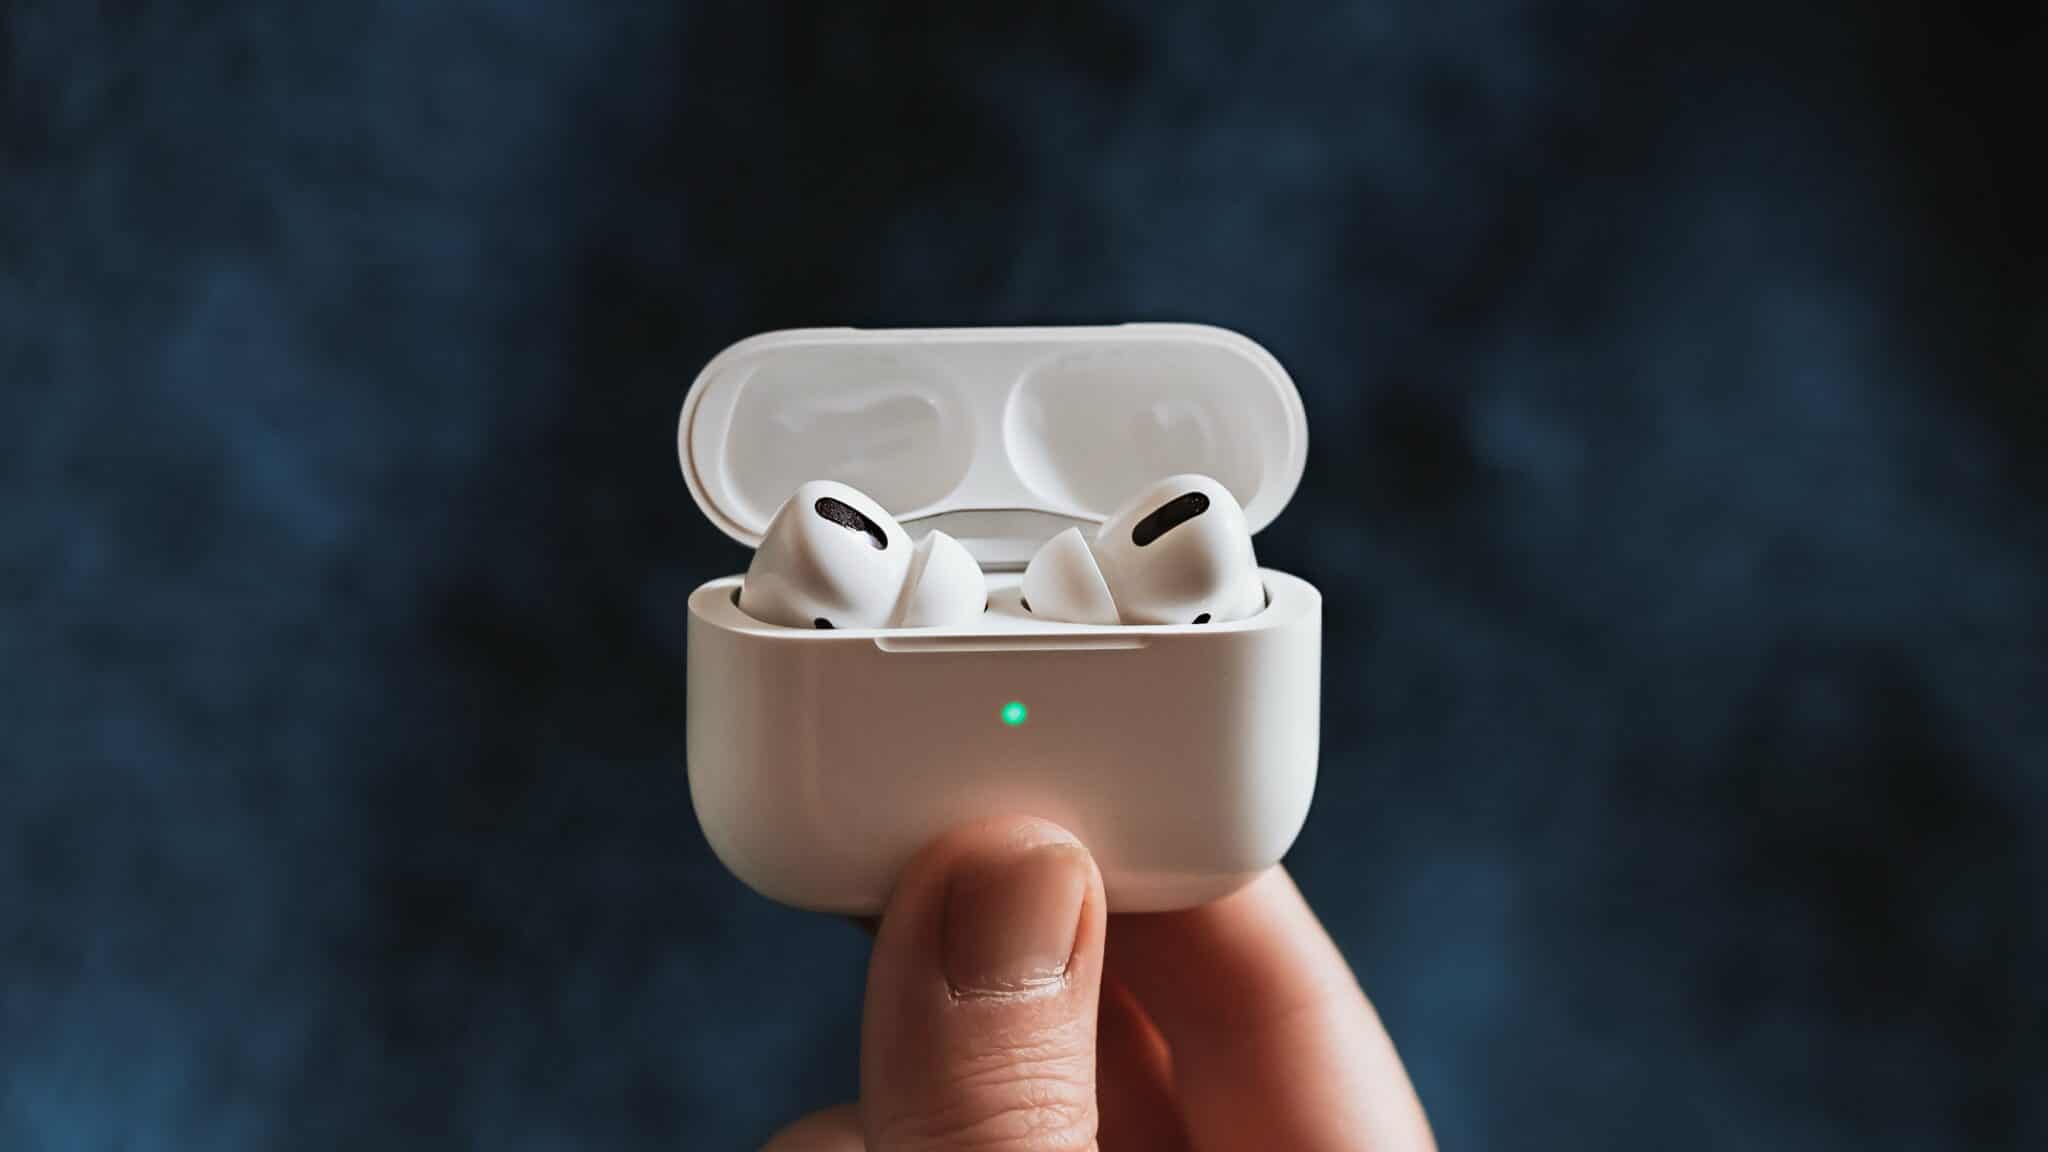 New Foxconn Factory in India to Manufacture AirPods